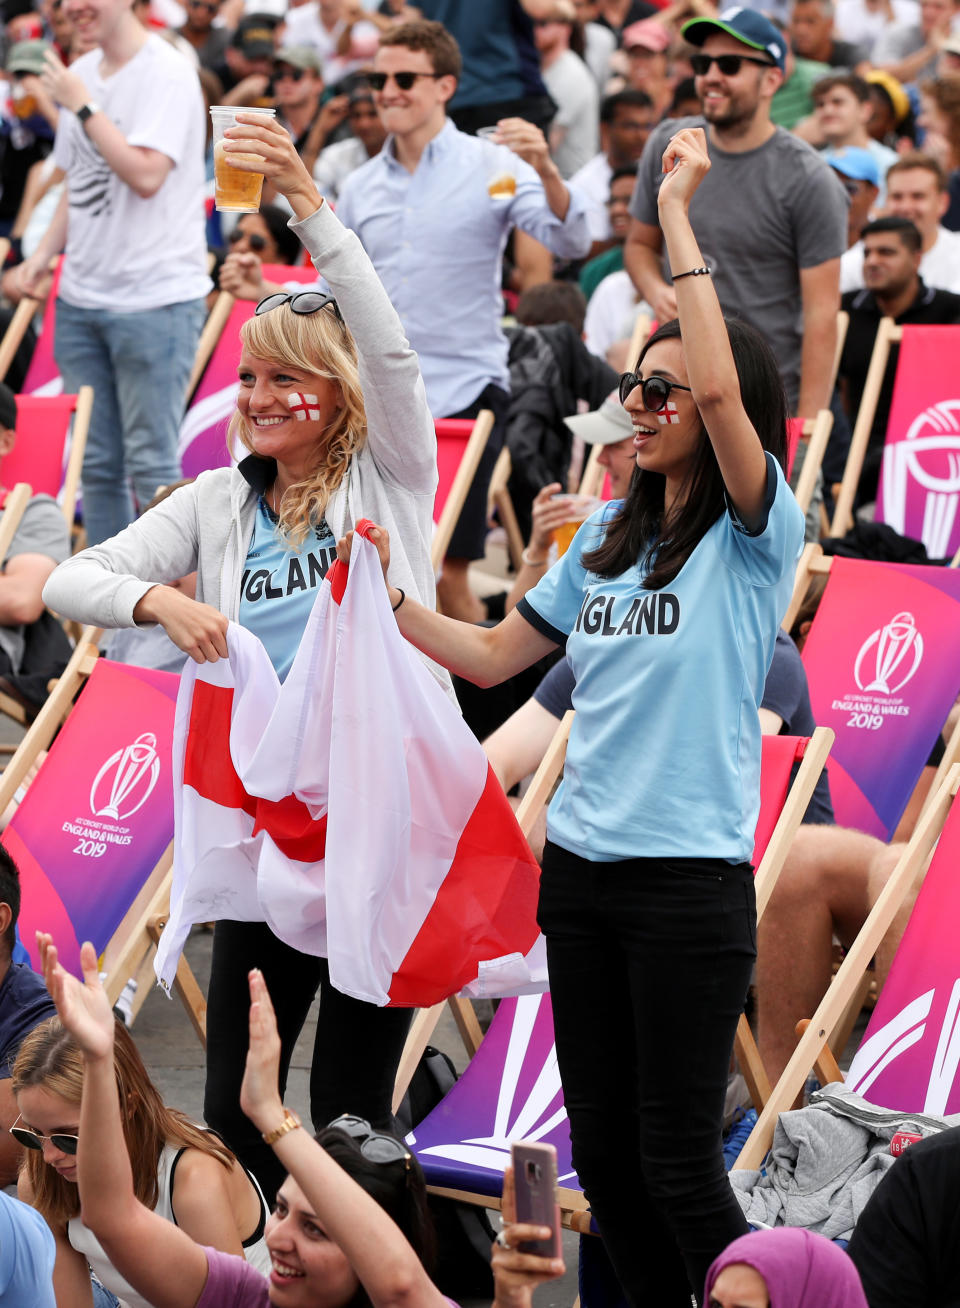 Fans celebrate the fall of New Zealand's 5th wicket as they watch a big screen in the Fanzone at Trafalgar Square during the Cricket World Cup Final between New Zealand and England at the ICC Fanzone, London.